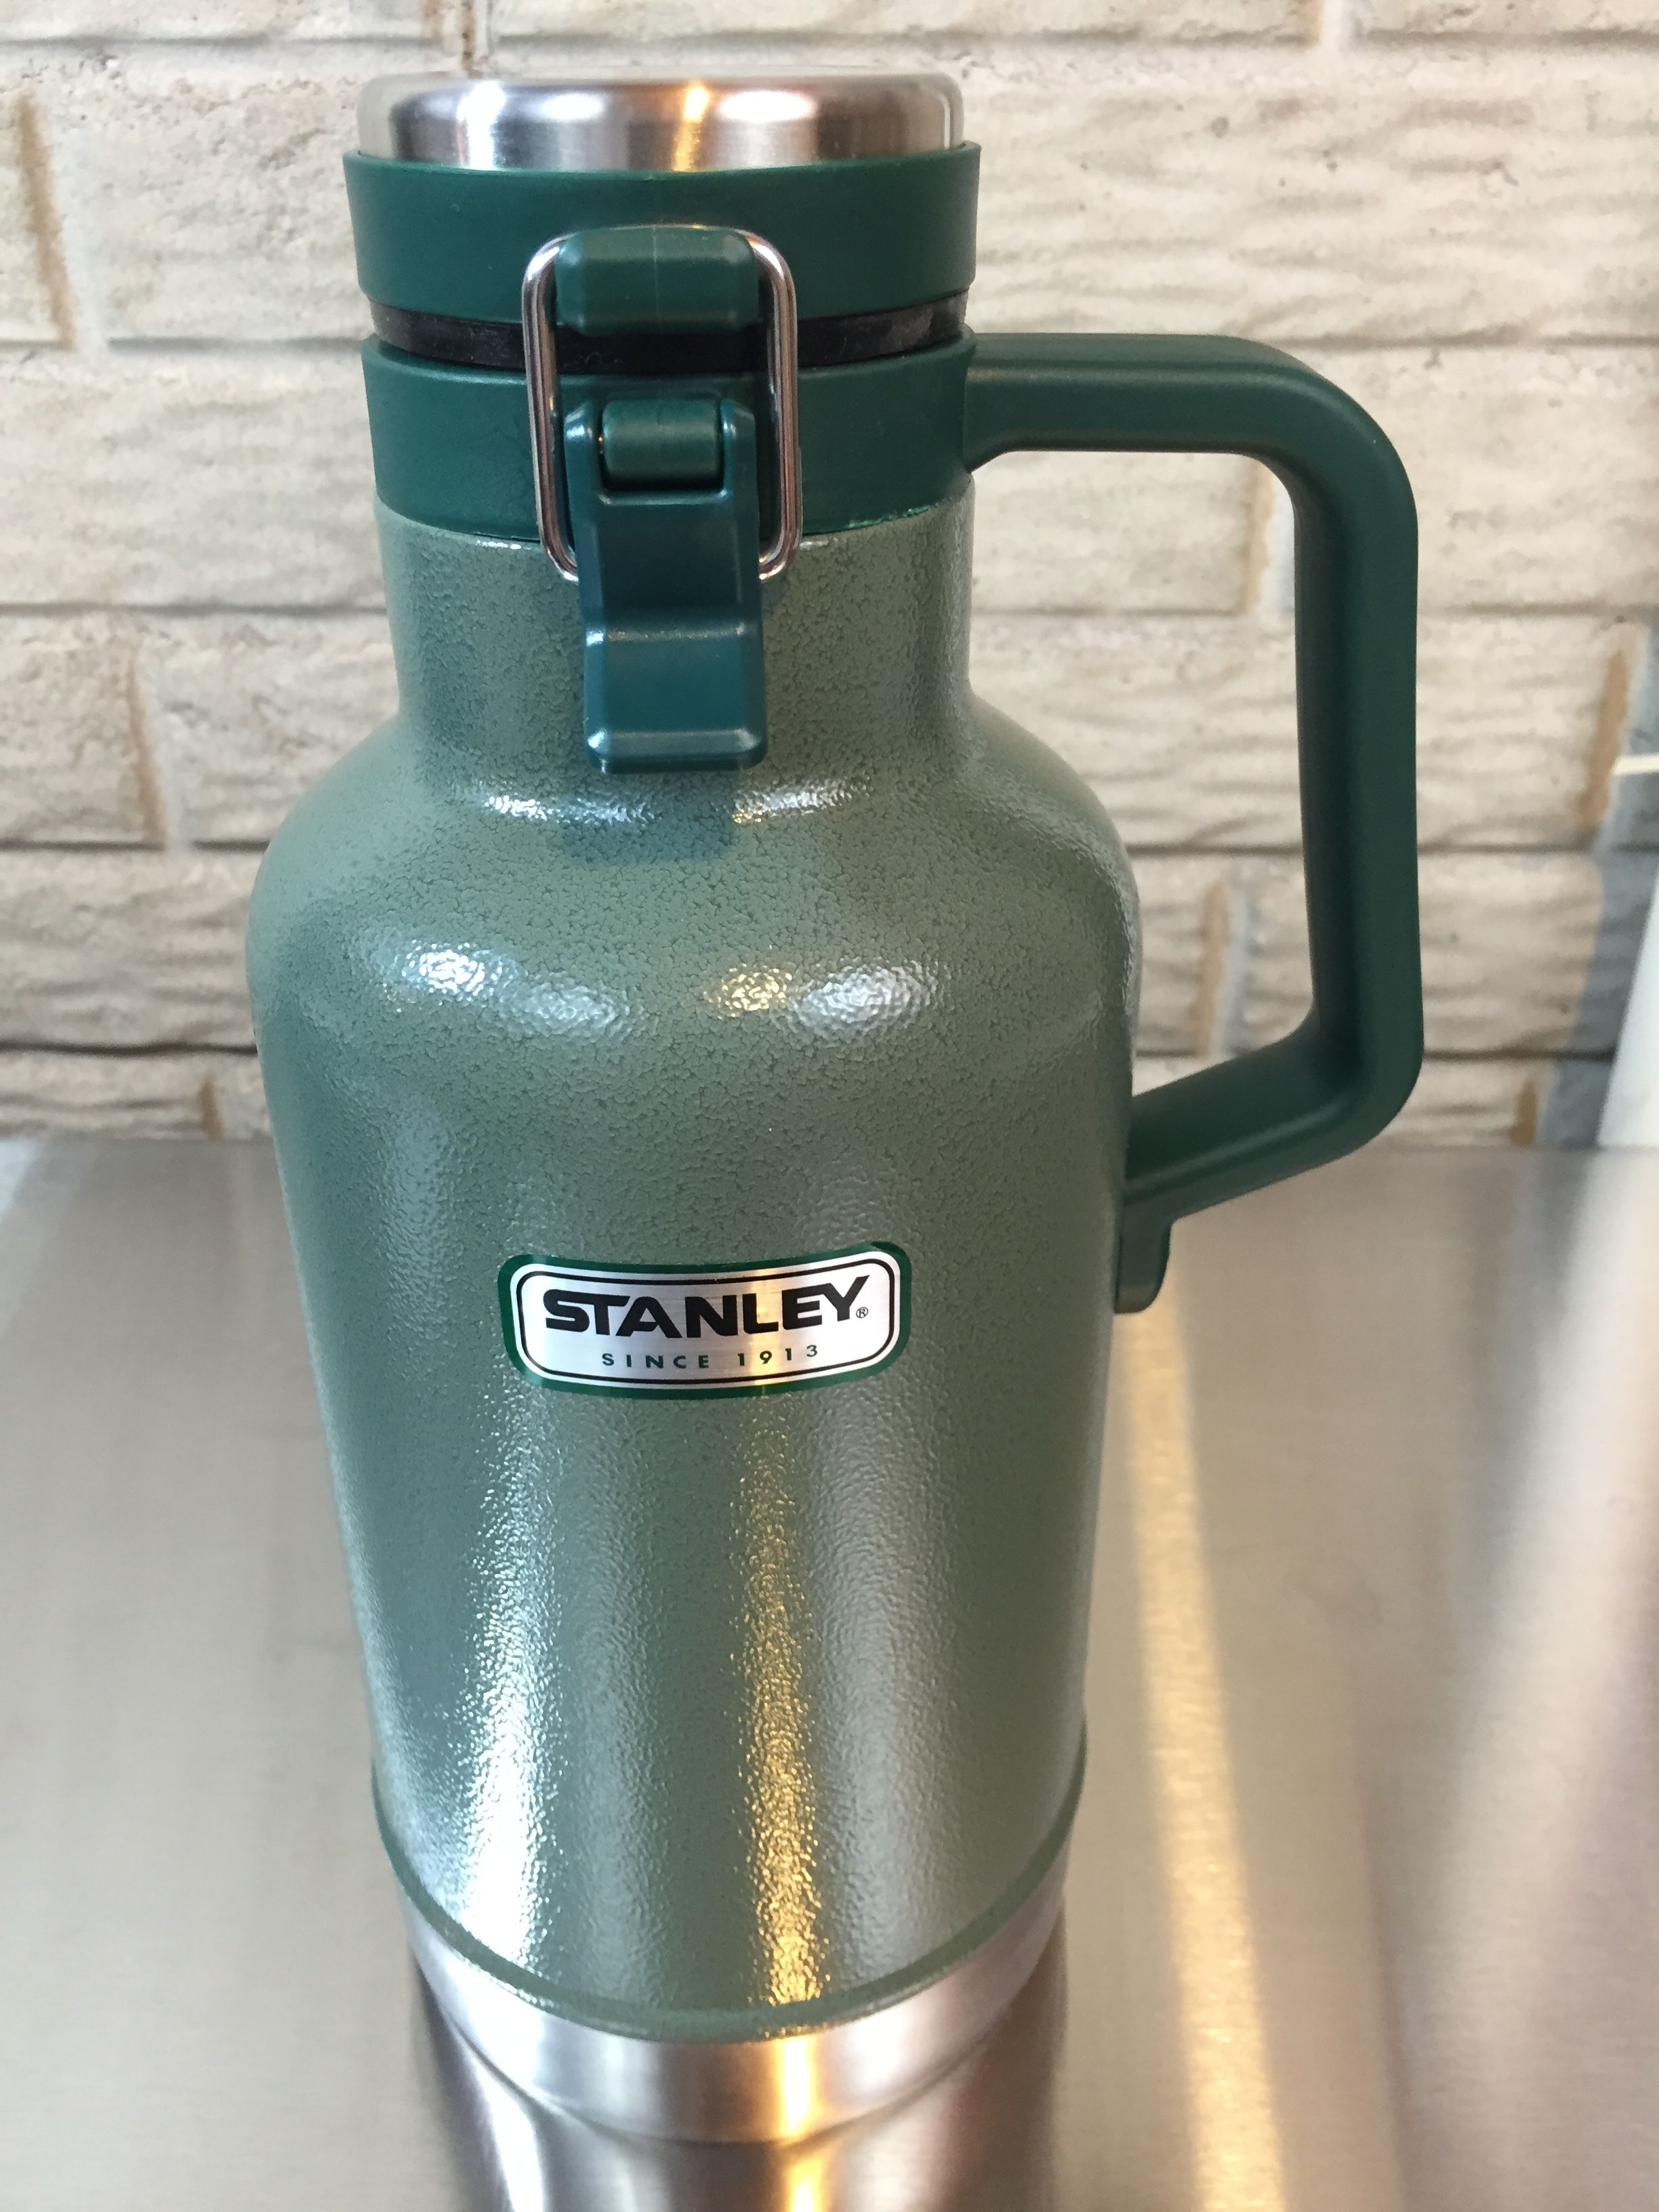 Stanley The Easy Pour Growler 64oz Stainless Steel 64 oz 10-01941